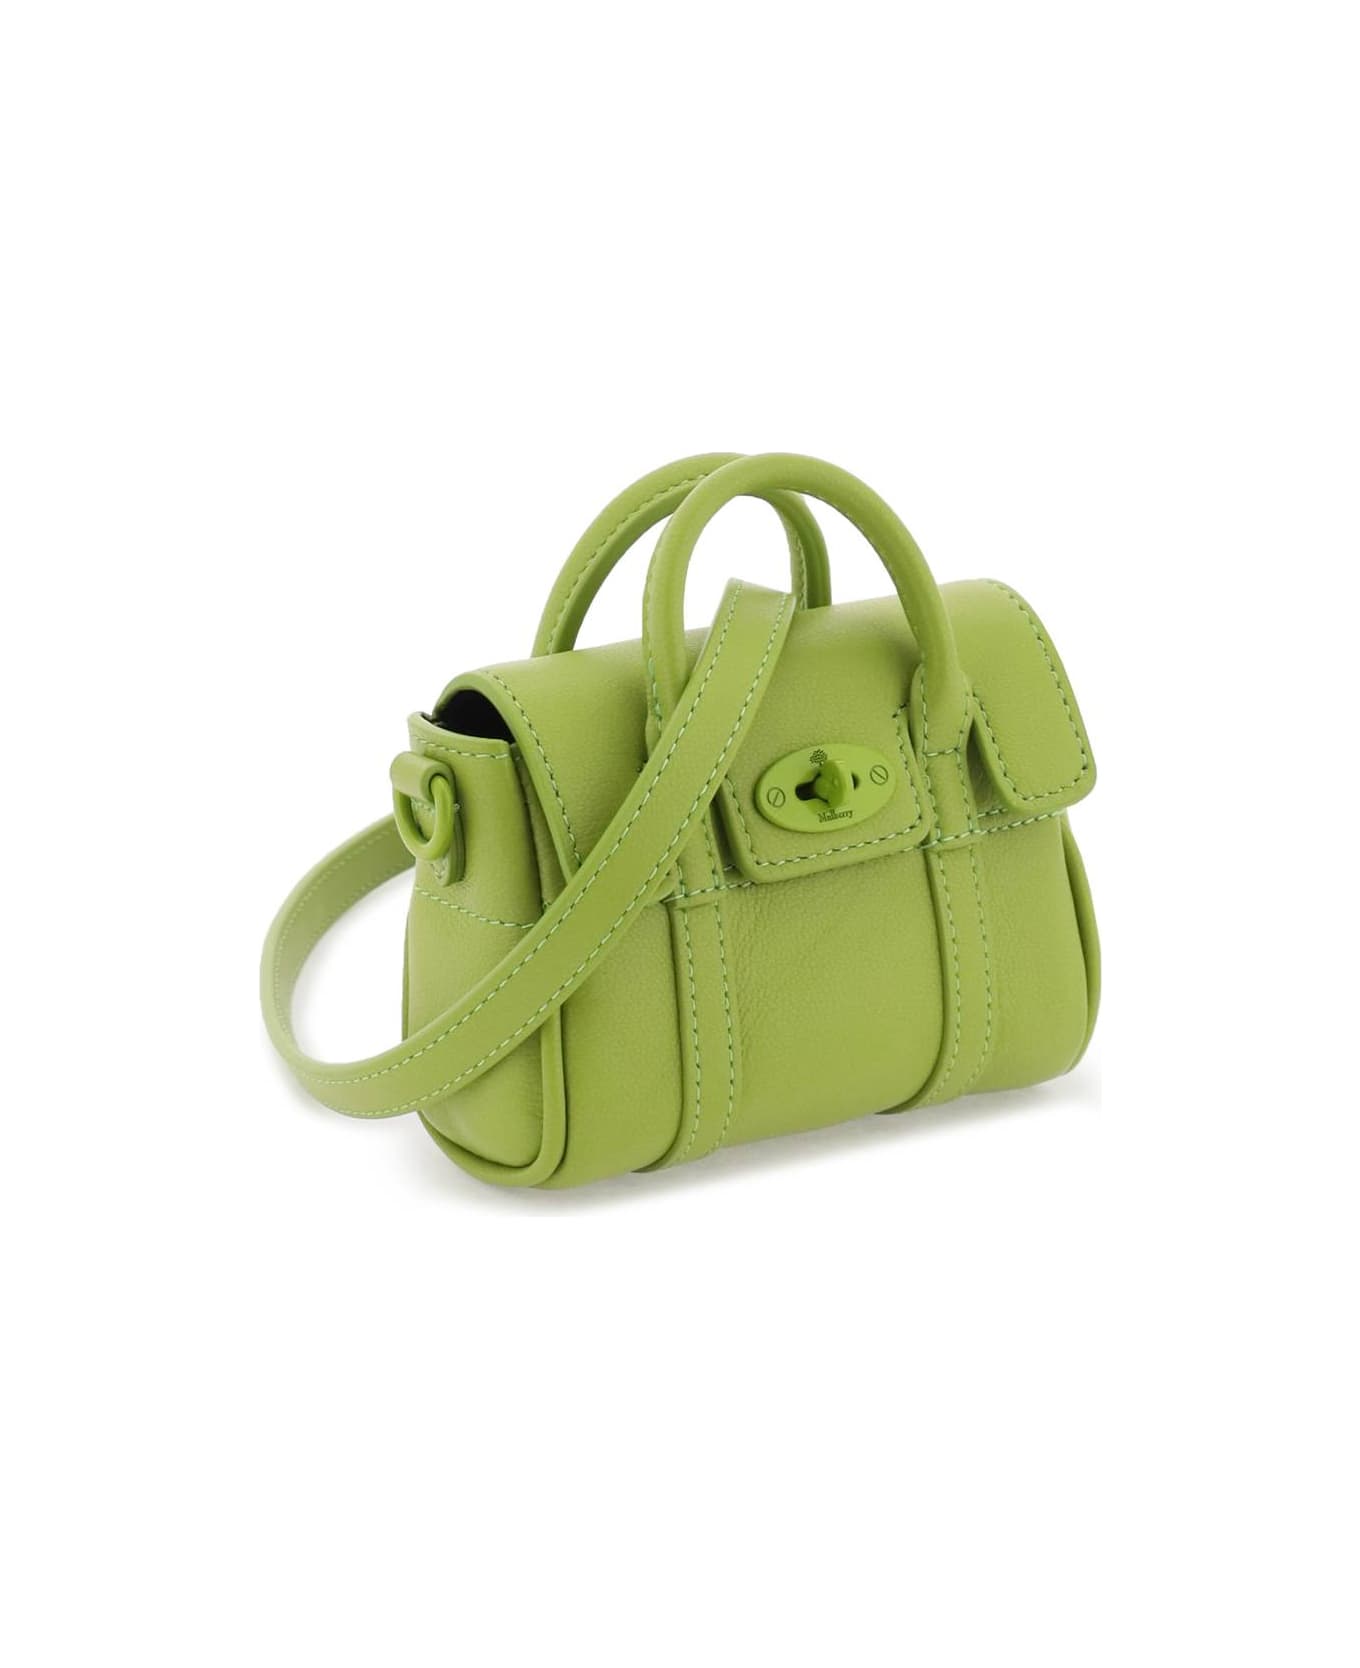 Mulberry Micro Bayswater - ACID GREEN (Green)